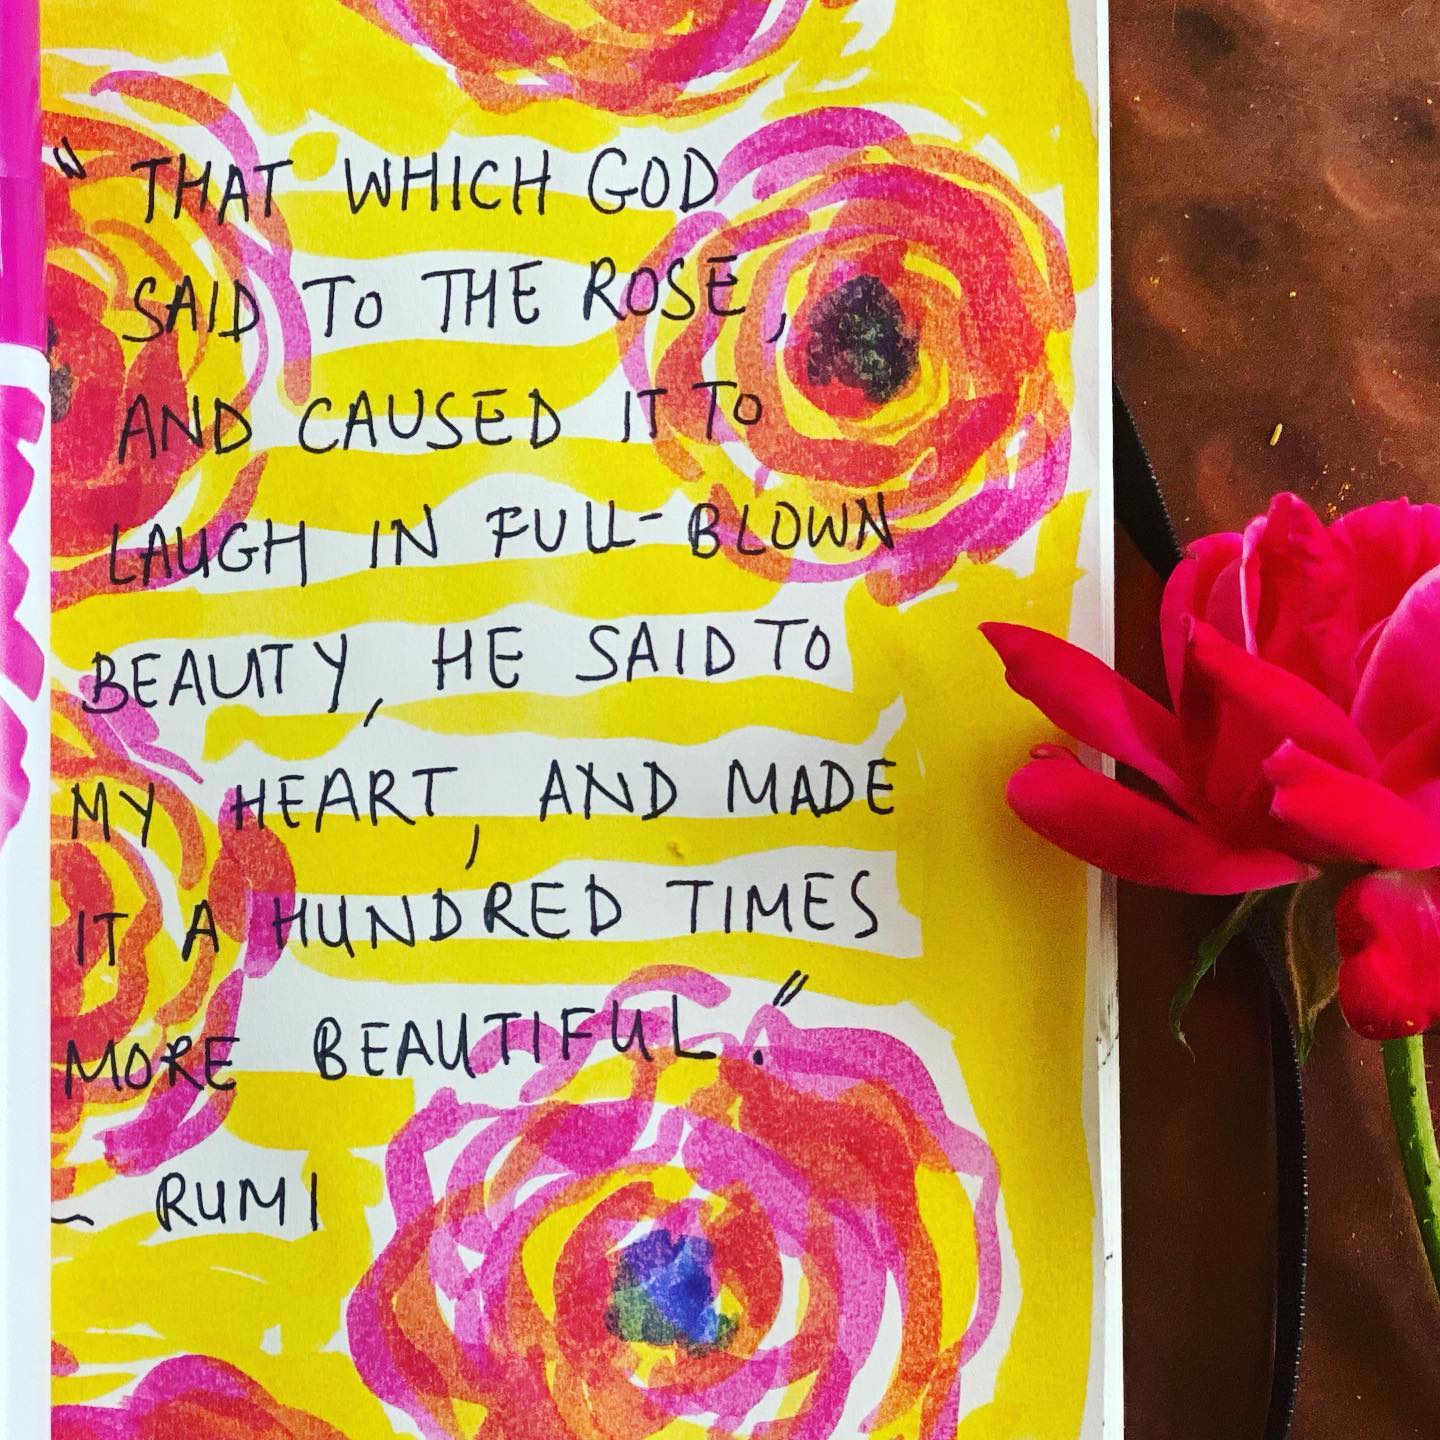 “That which God said to the rose, and caused it to laugh in full-blown beauty, He said to my heart, and made it a hundred times more beautiful.”
- Rumi